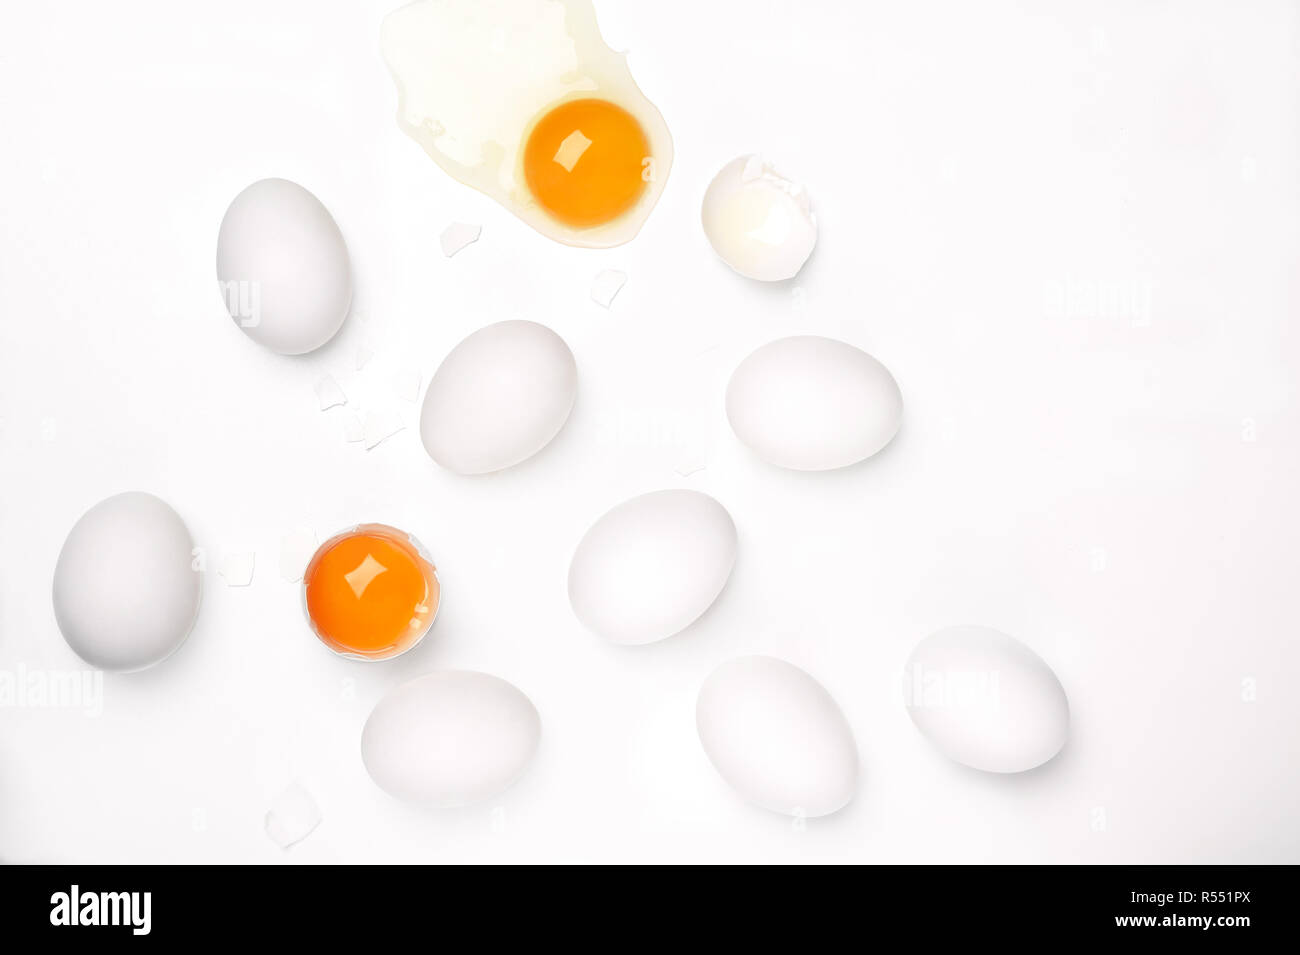 White eggs and egg yolk in the white background.Broken white egg on the white background .Healthy eating concept.Eggs diet  for weight loss. Stock Photo